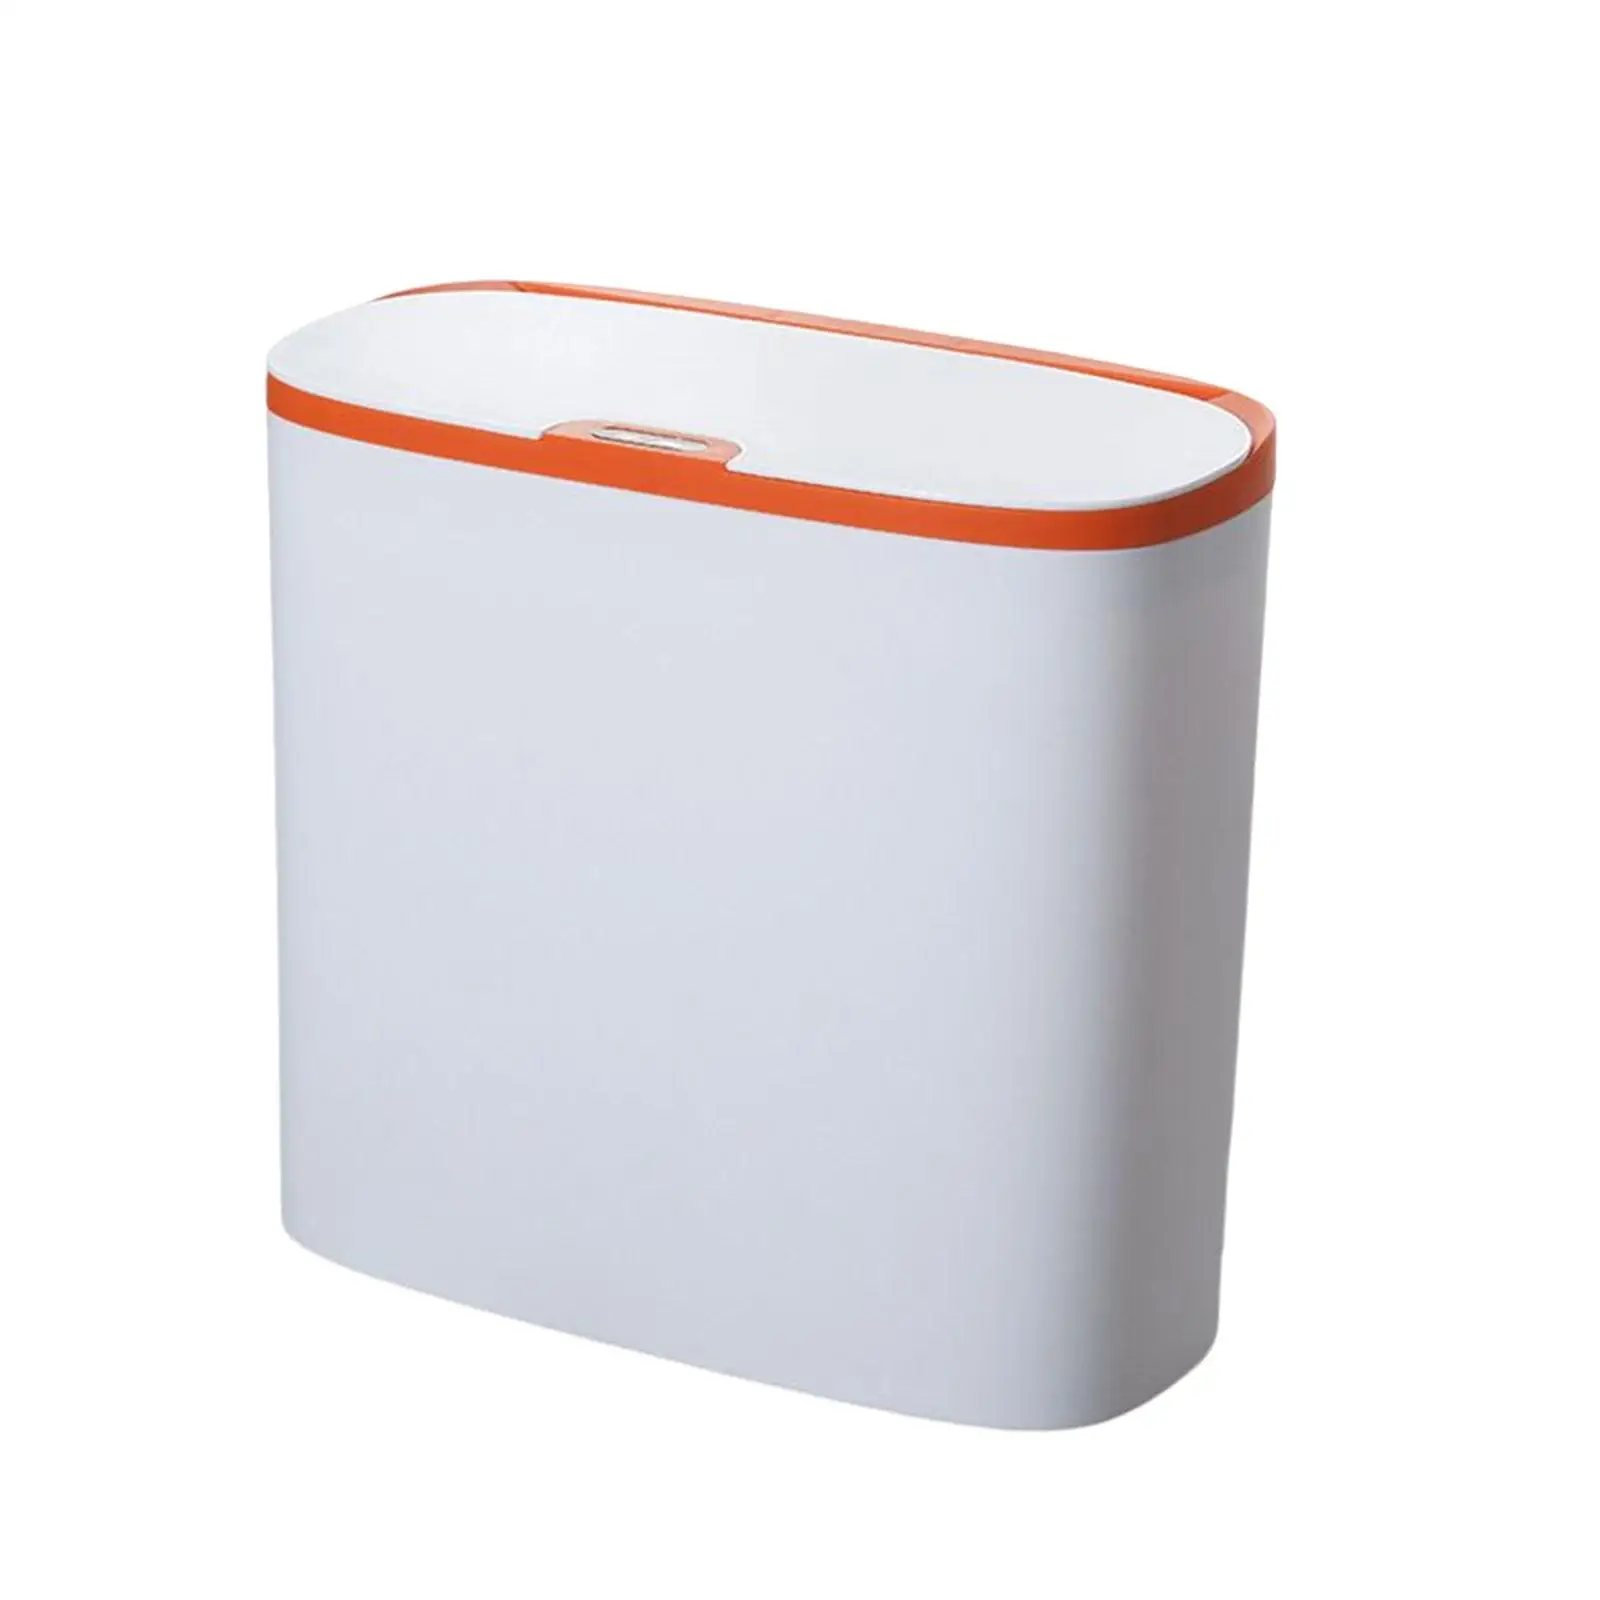 Intelligent Trash Bin 14L Capacity Odourless Touchless with Airtight Lid Kitchen